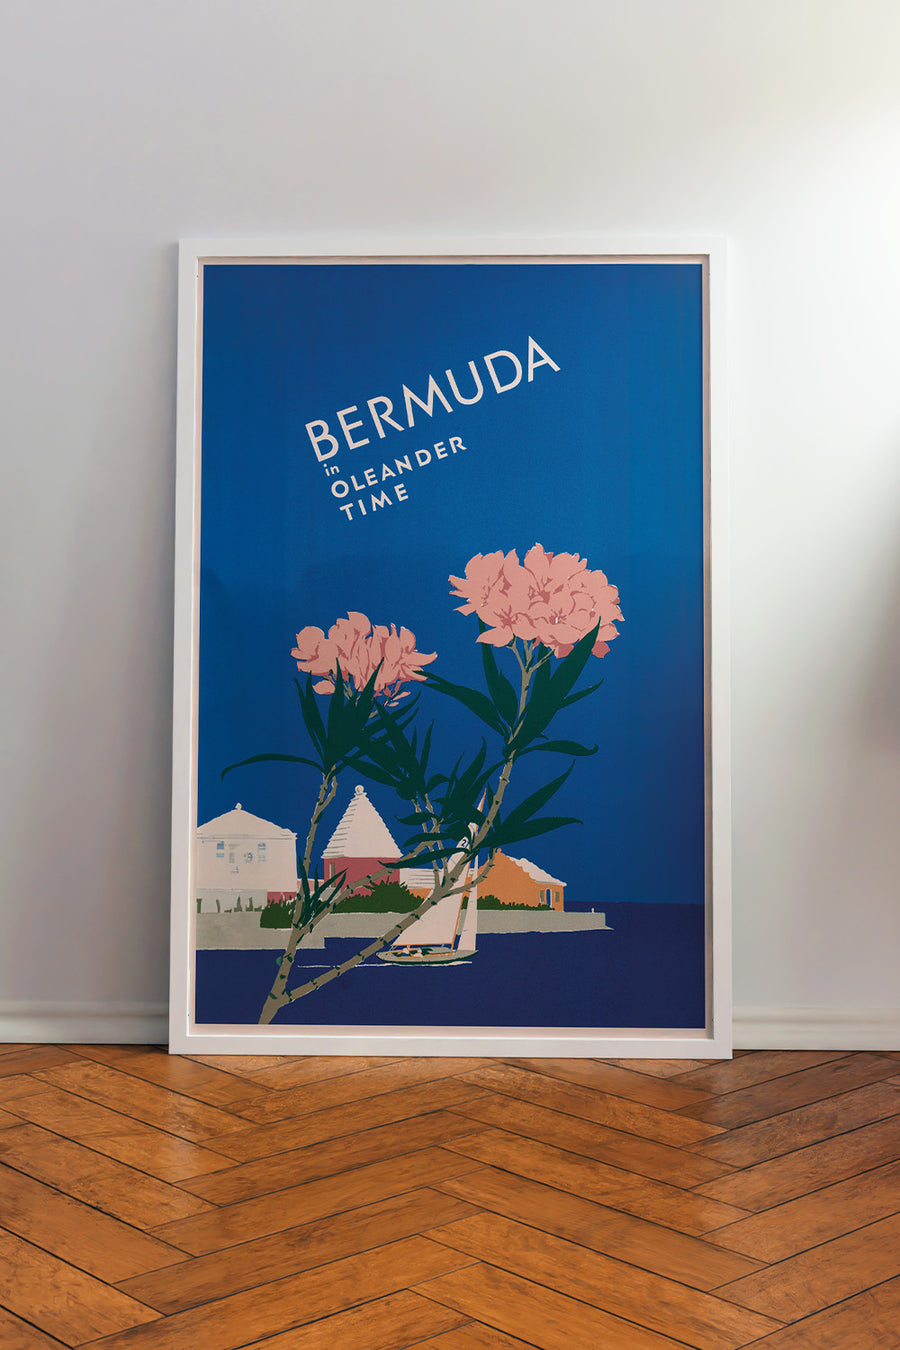 Vintage Bermuda travel poster by Adolf Treidler depicting an island with two pink oleander flowers and "Bermuda in Oleander Time" text on a blue background.